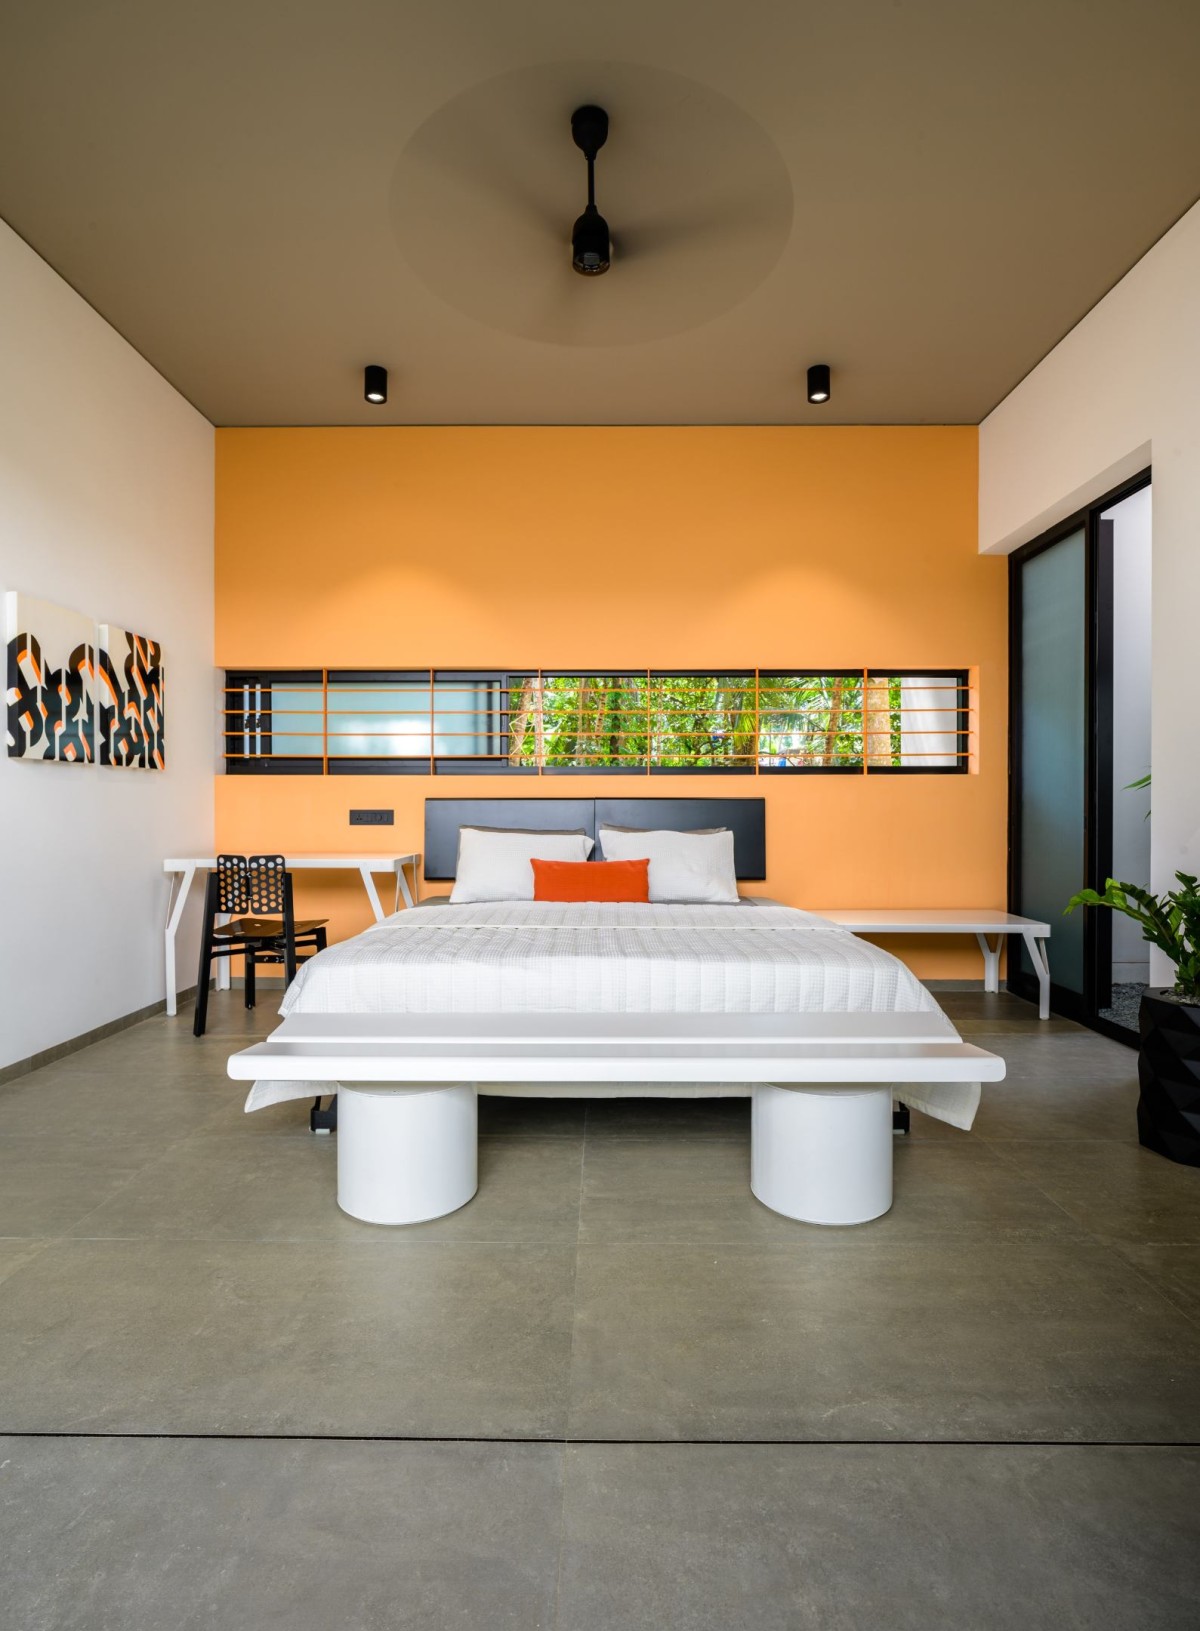 Bedroom 1 of The Colour Burst House by LIJO.RENY.architects